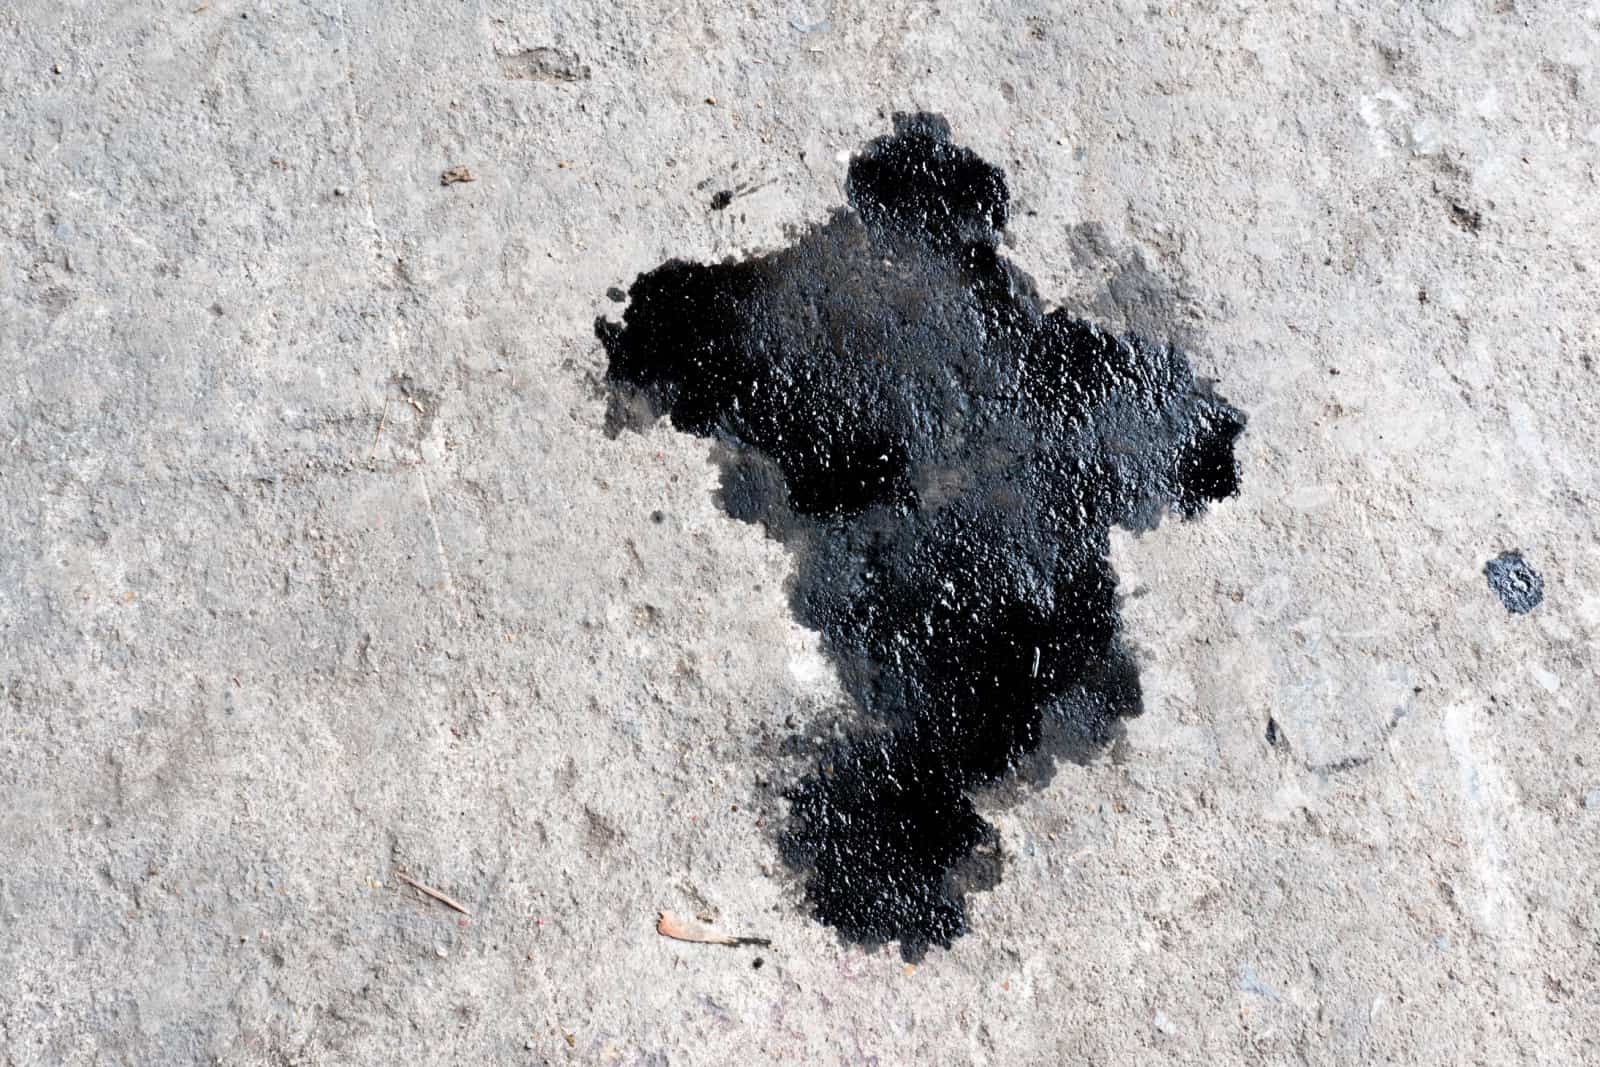 Abstract black engine oil drop on concrete floor texture backgruond.